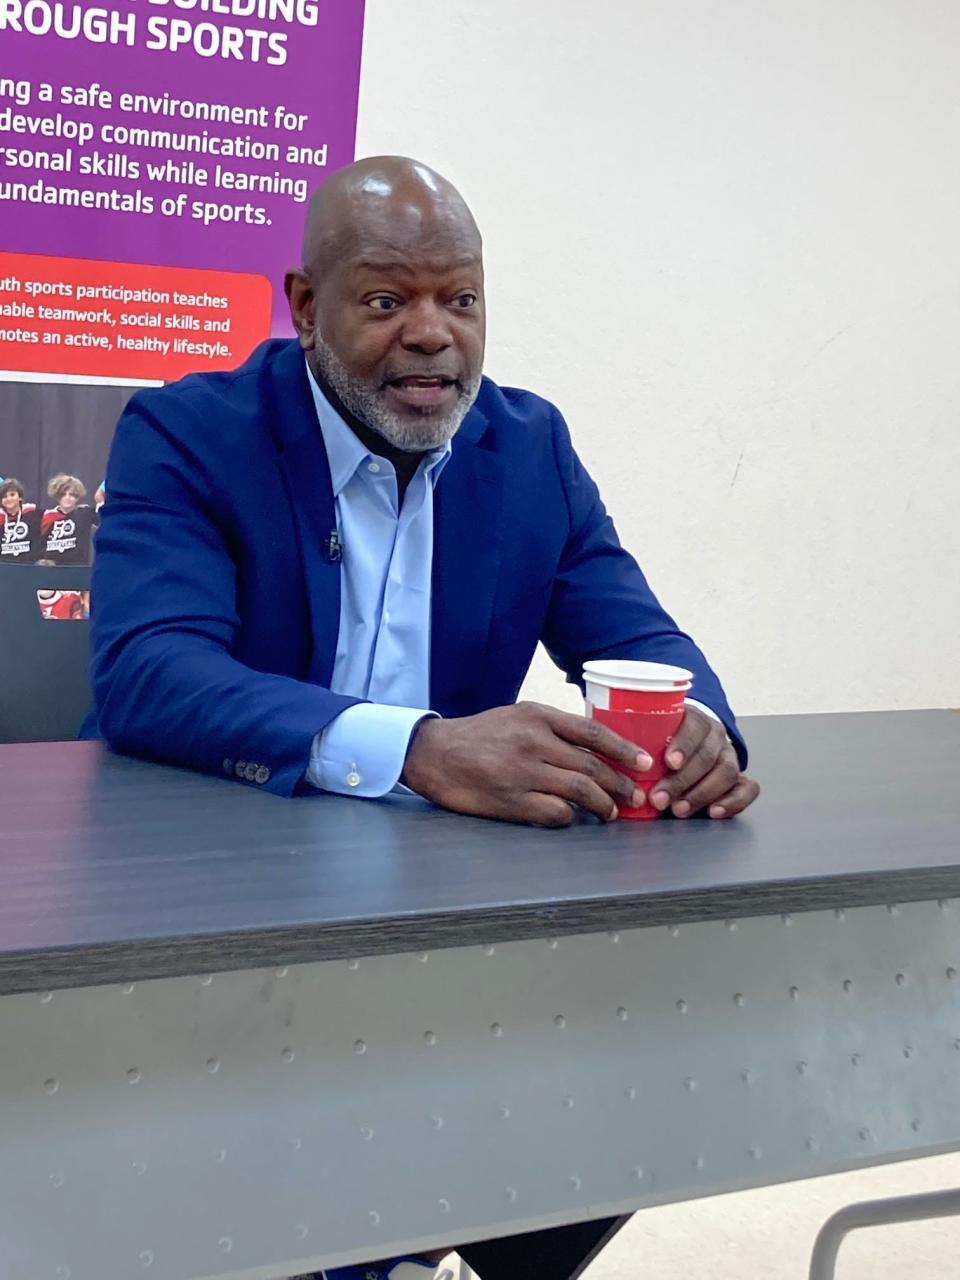 Emmitt Smith talks to reporters Wednesday before his motivational speech at the Peter Blum Family YMCA fundraising event in Boca Raton,